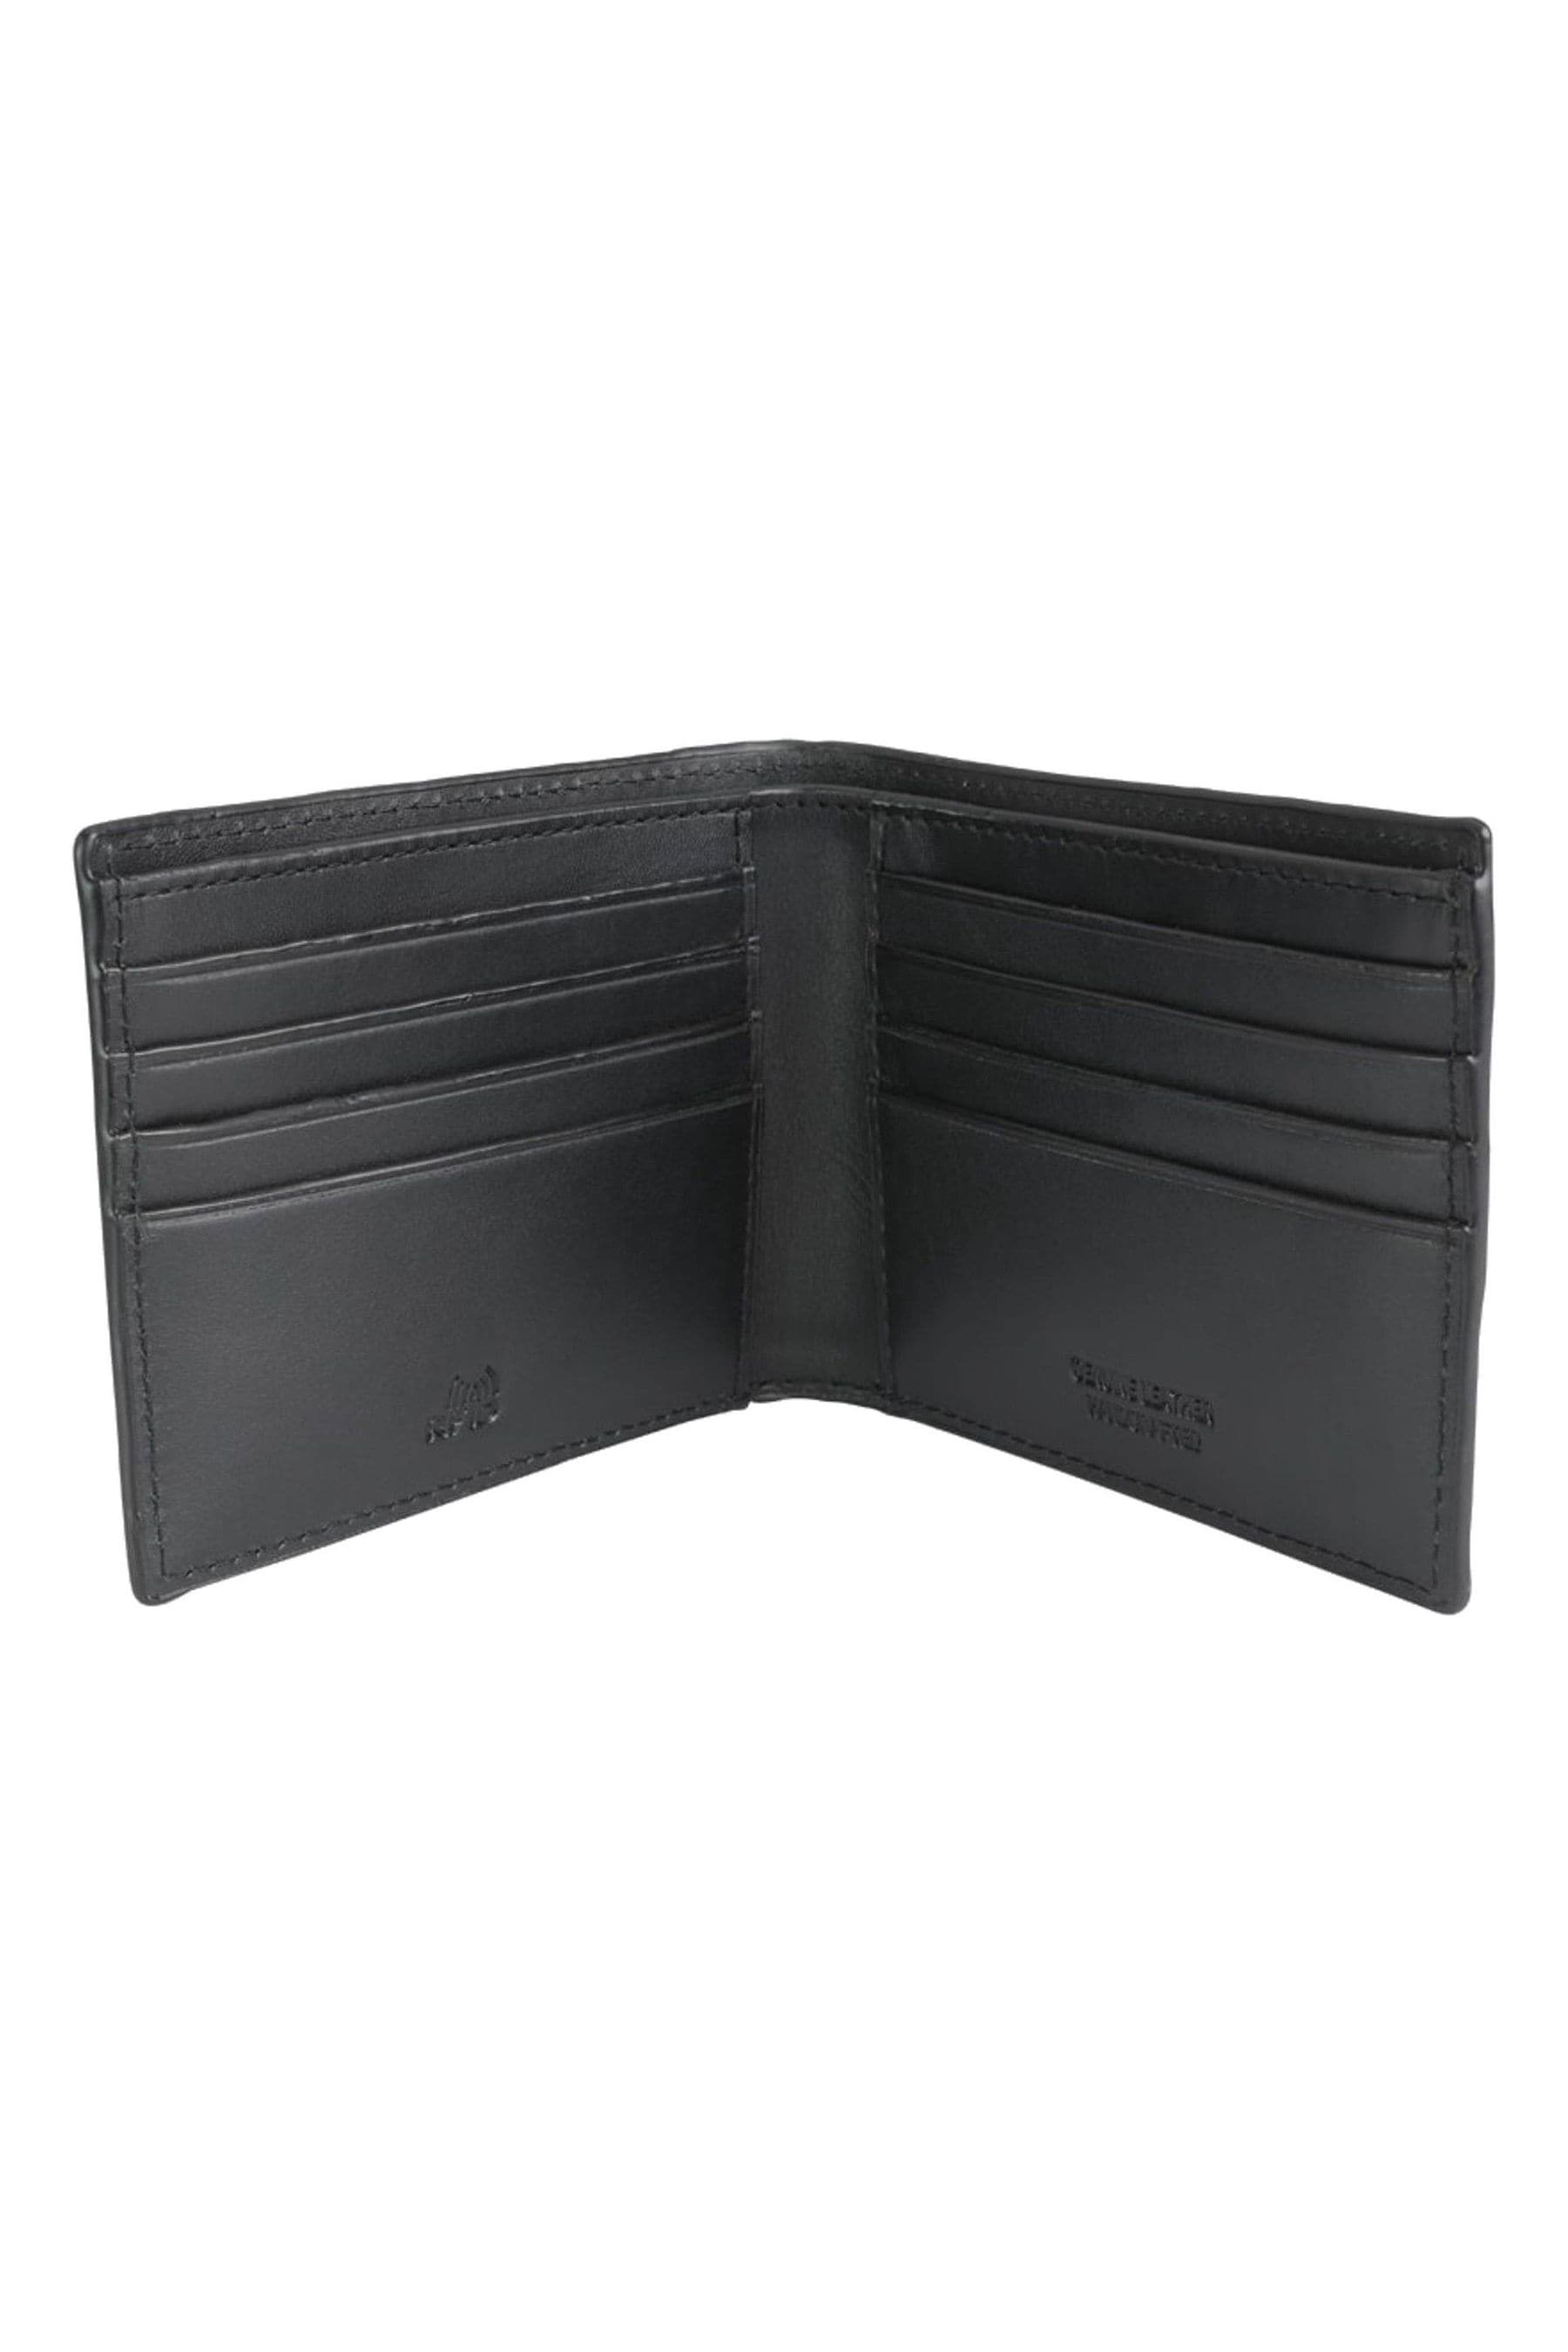 Buy Loake Midland Wallet from the Next UK online shop